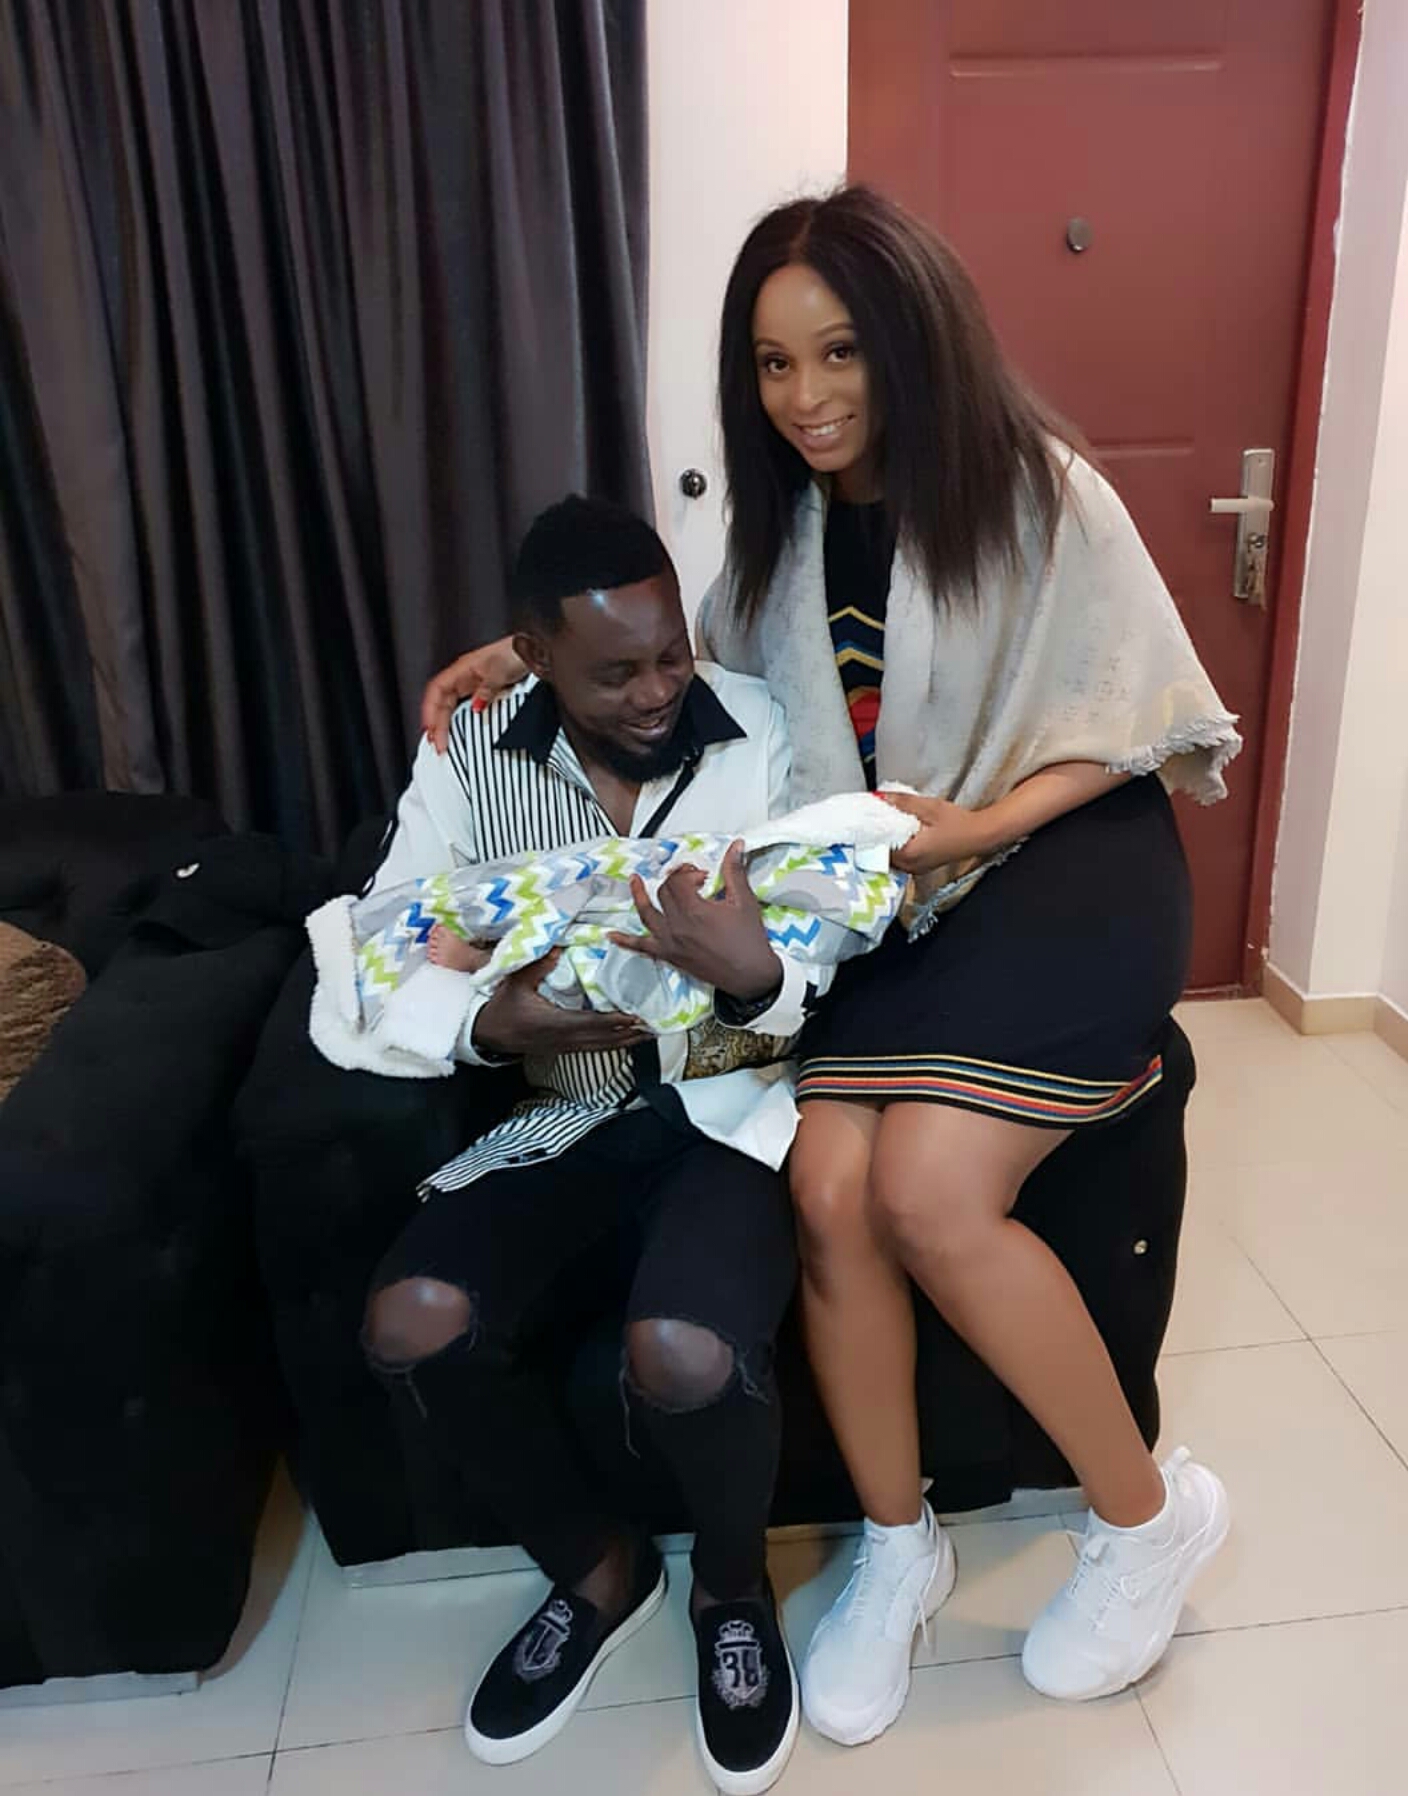 Comedian AY and wife appear in cheerful photo as they show love Toyin Abraham's baby 